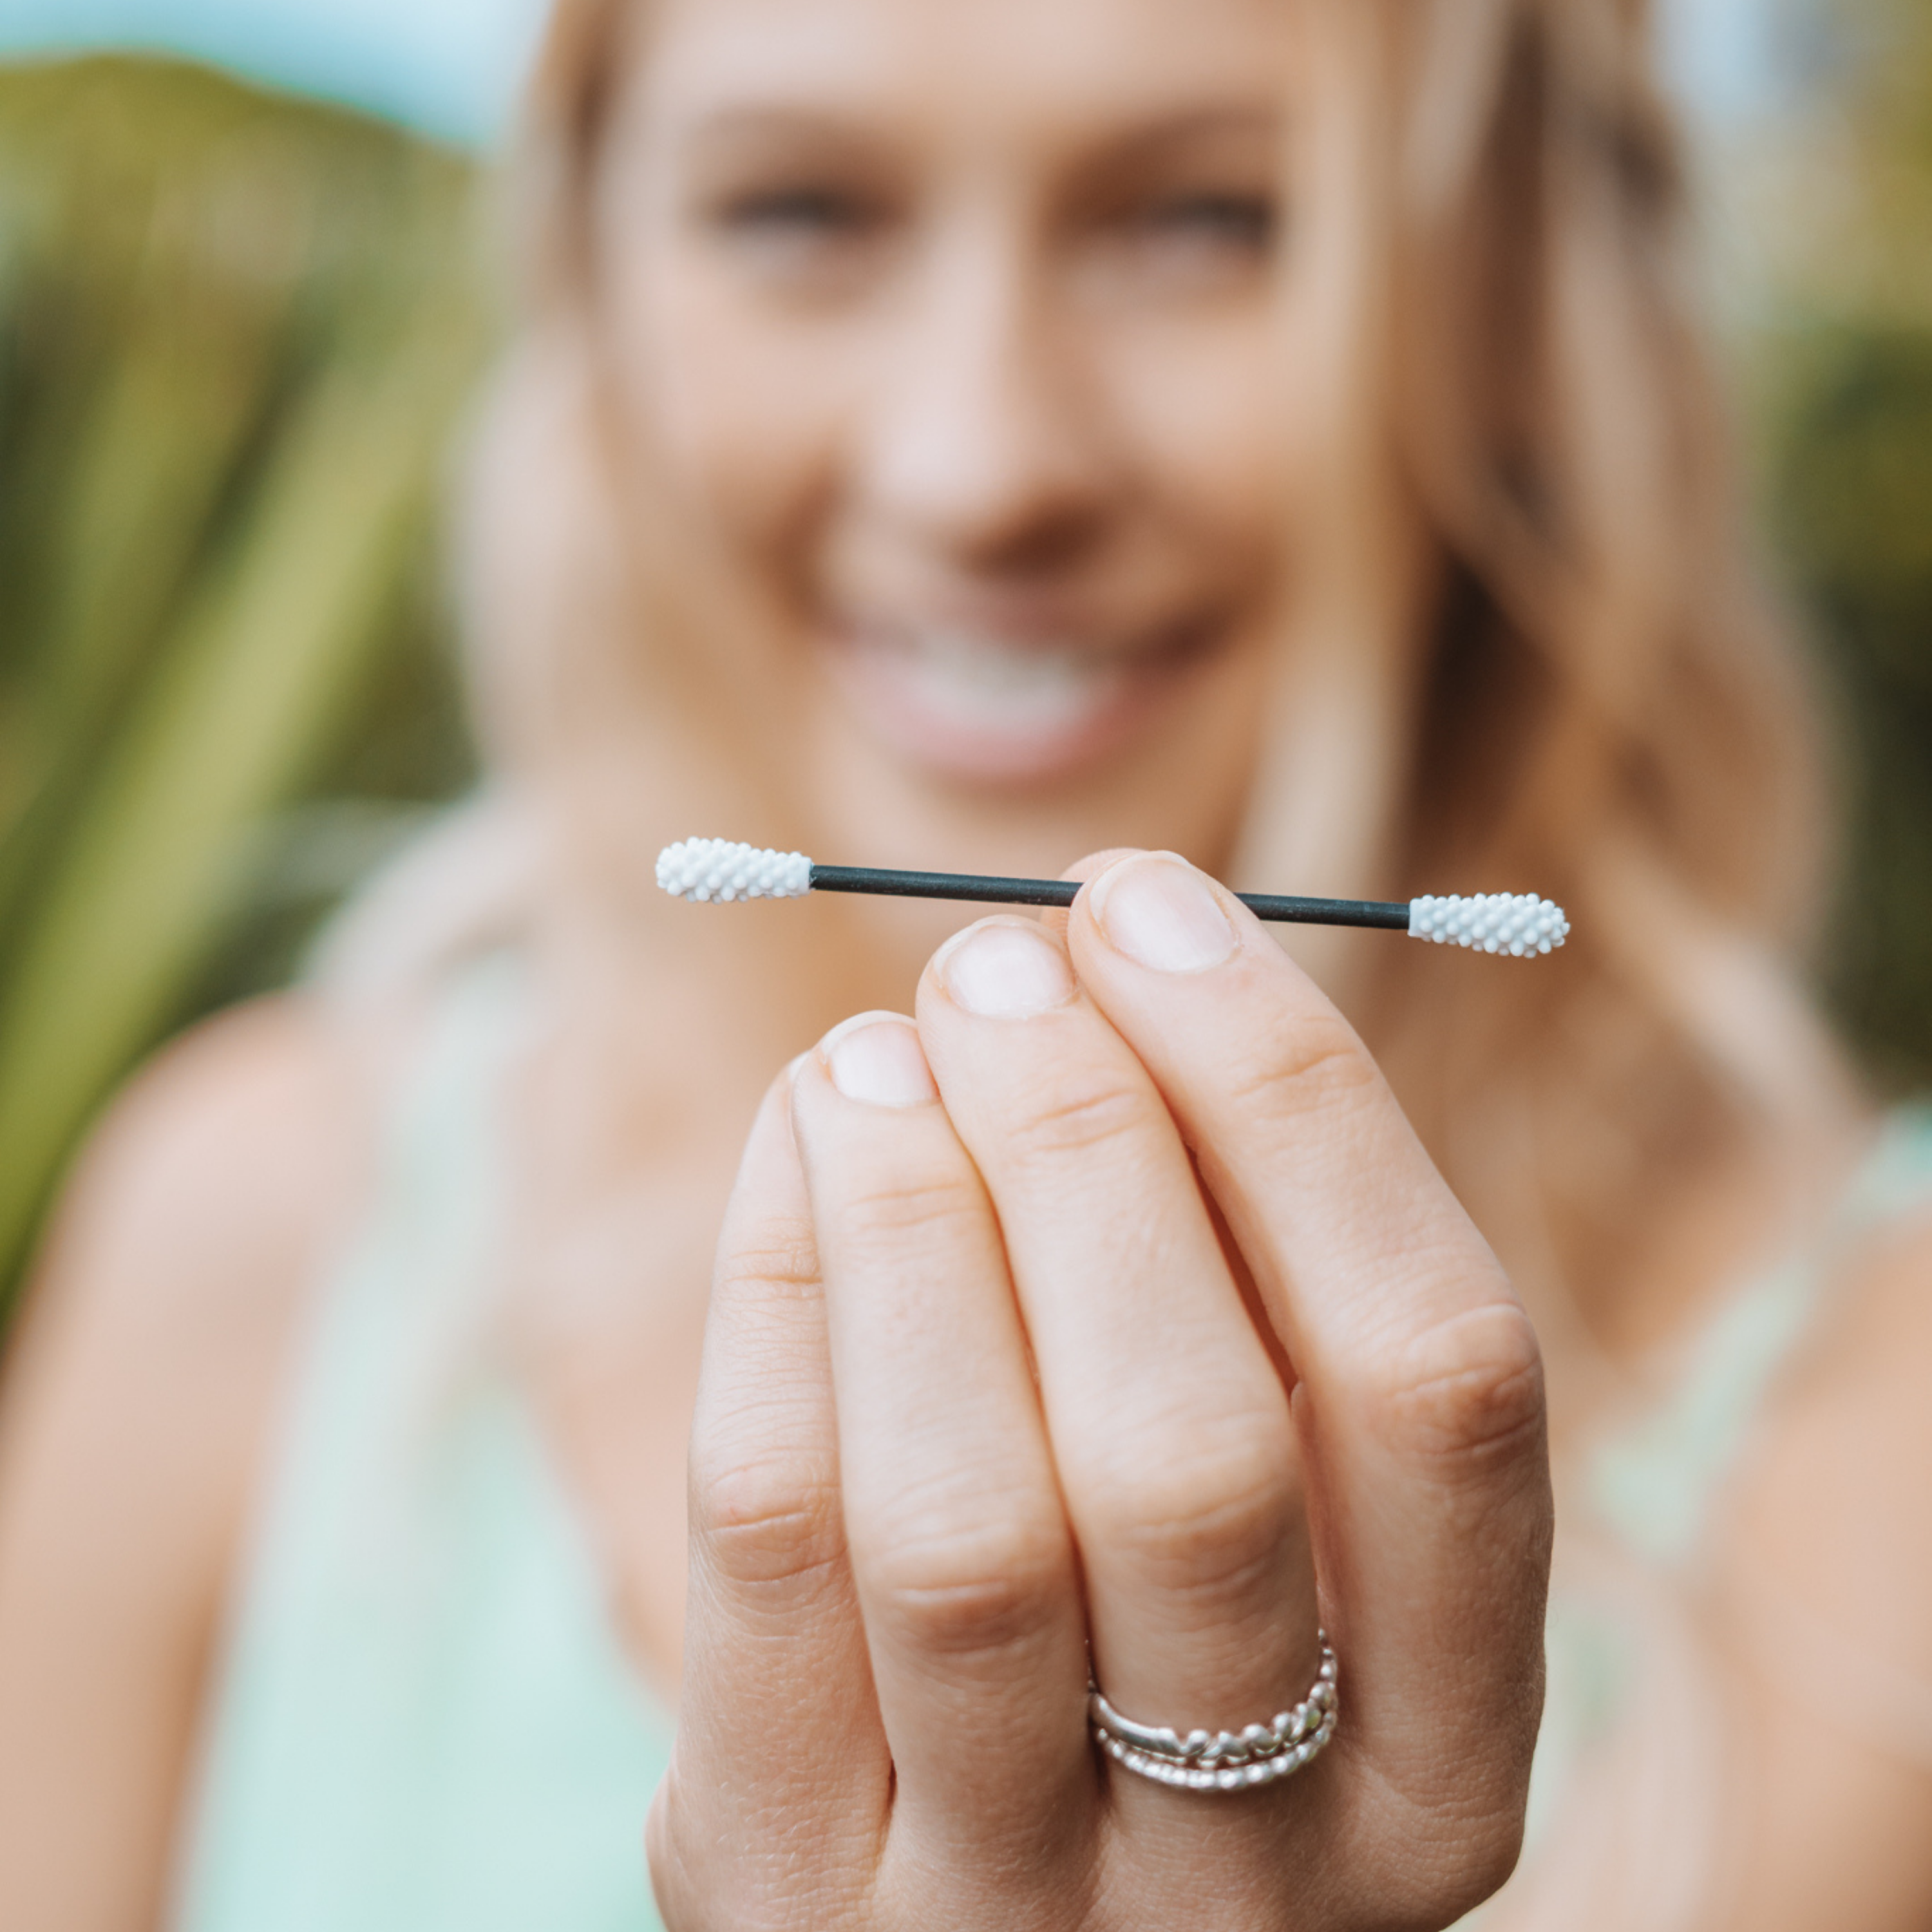 A woman holding up a reusable cotton swab.